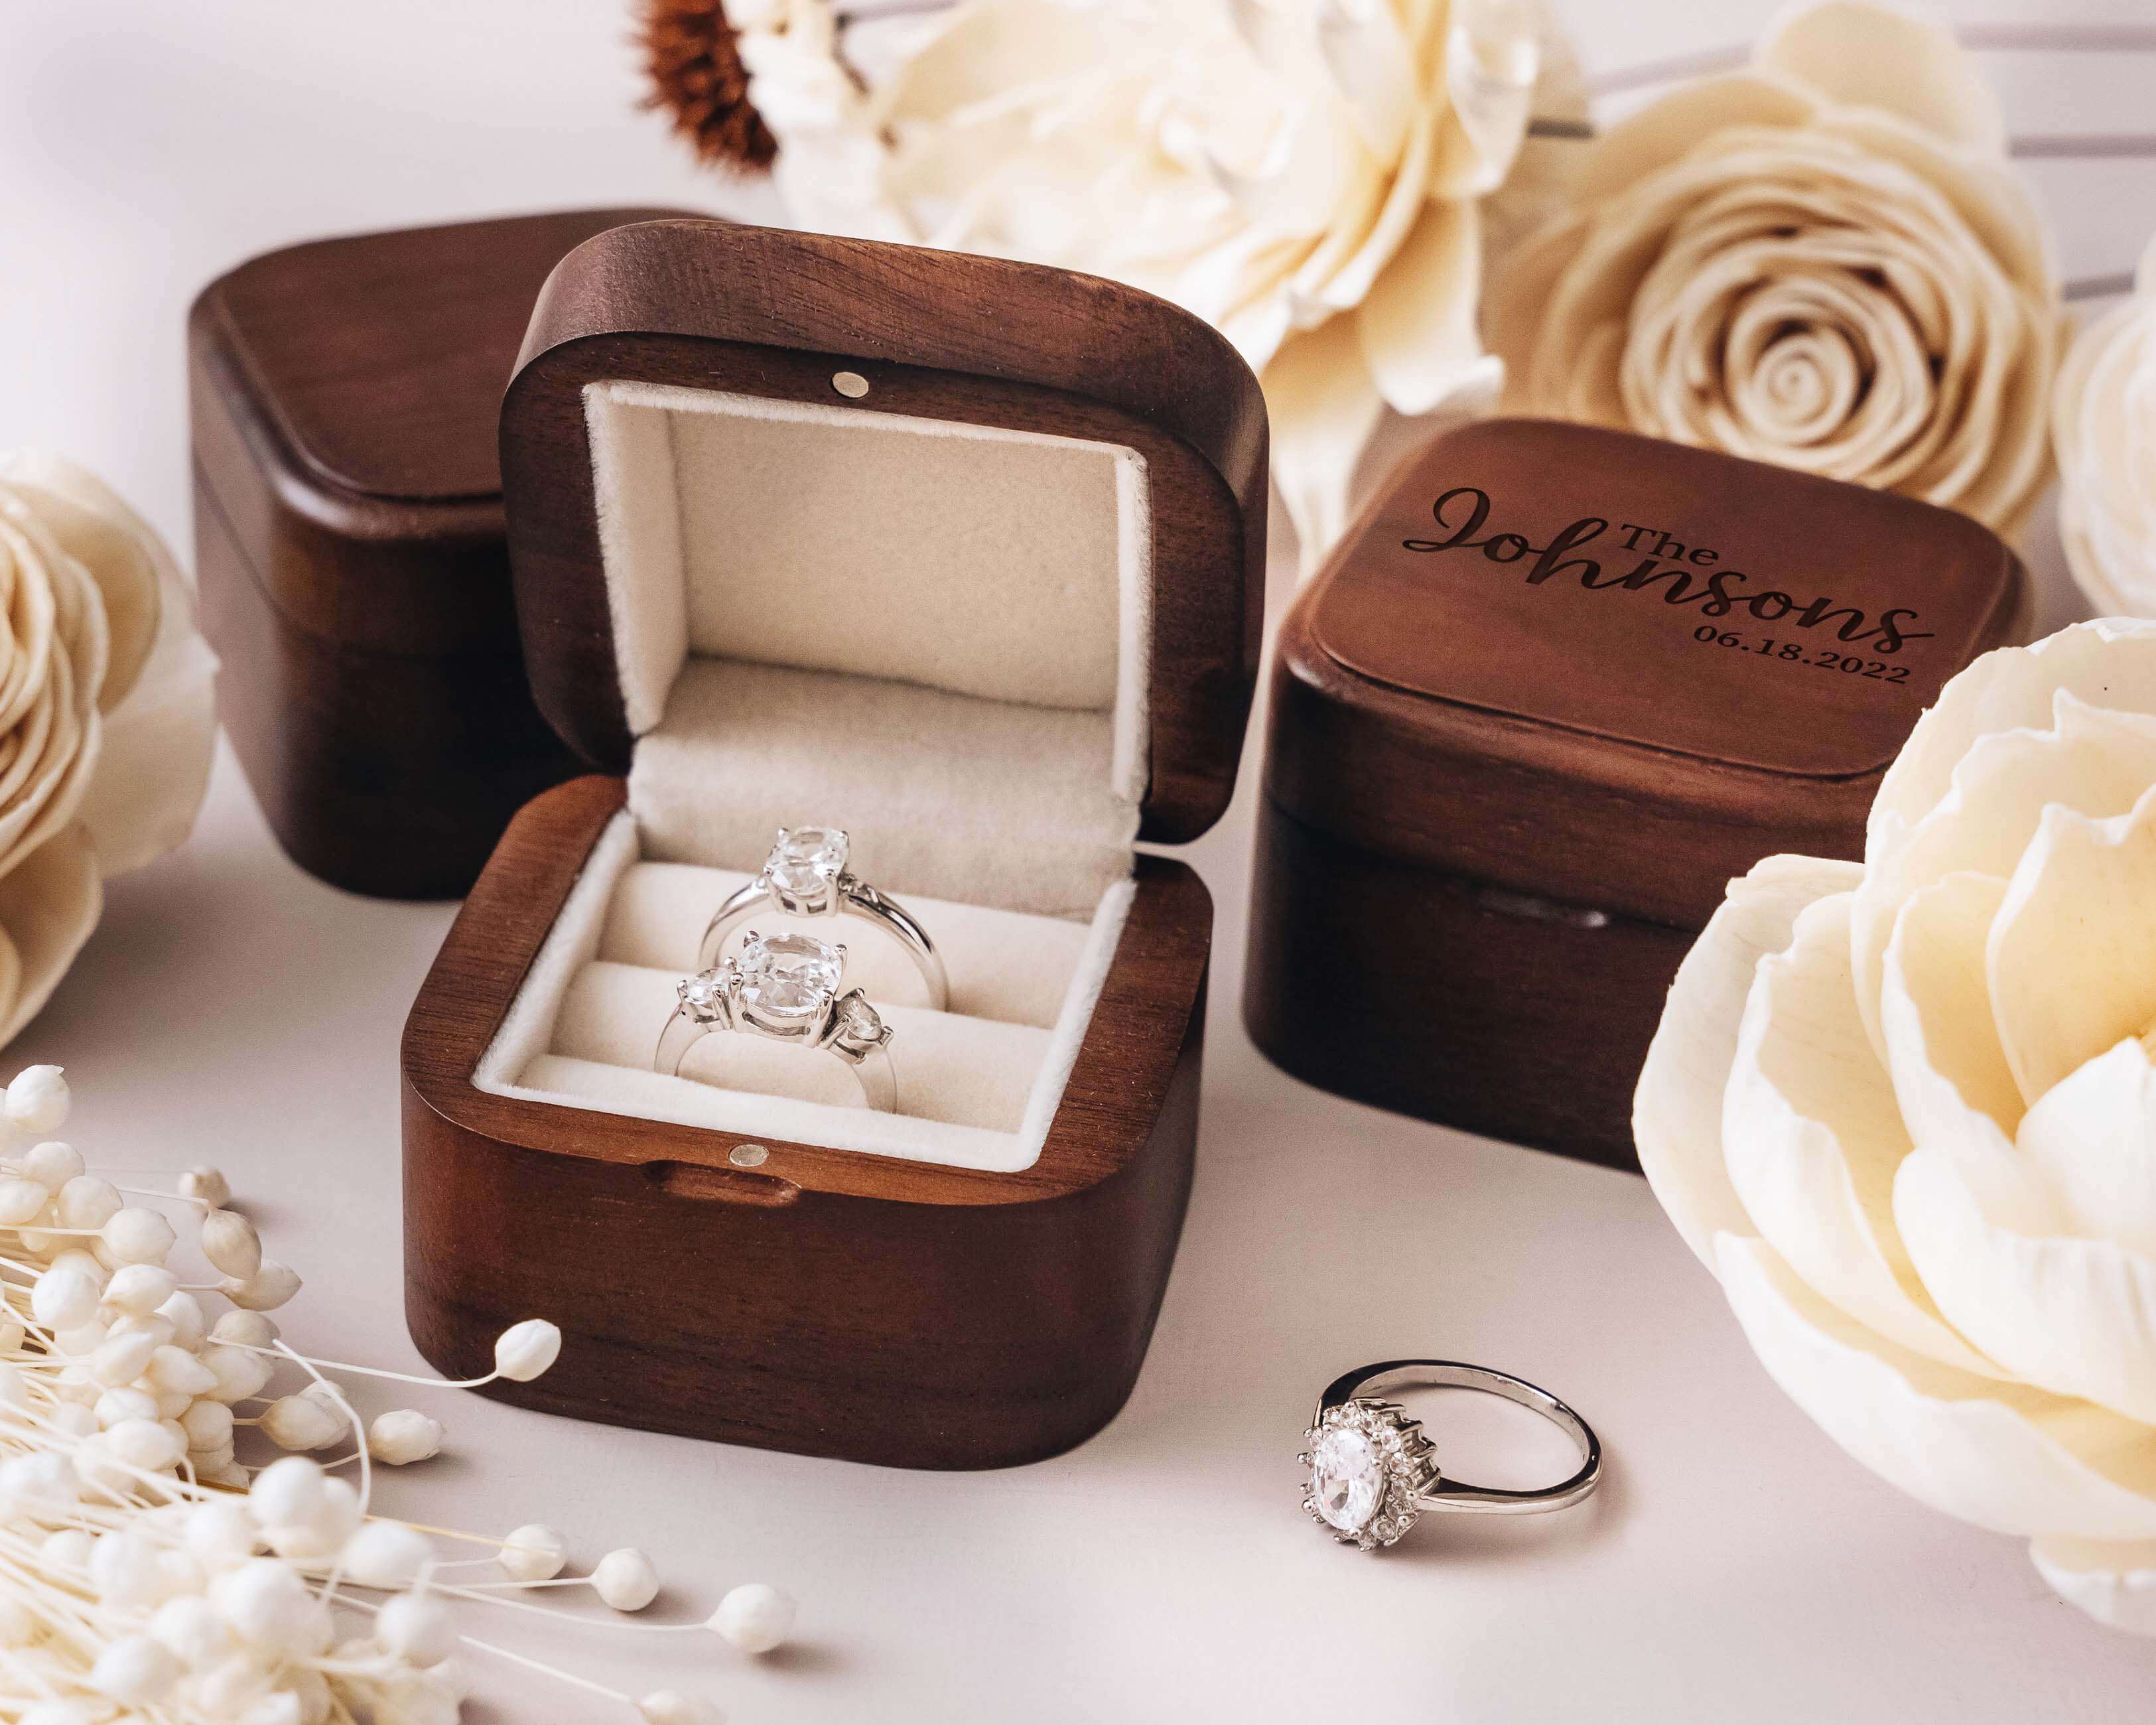 Personalized Engraved Wooden Wedding Ring Box with custom text - Hundred Hearts